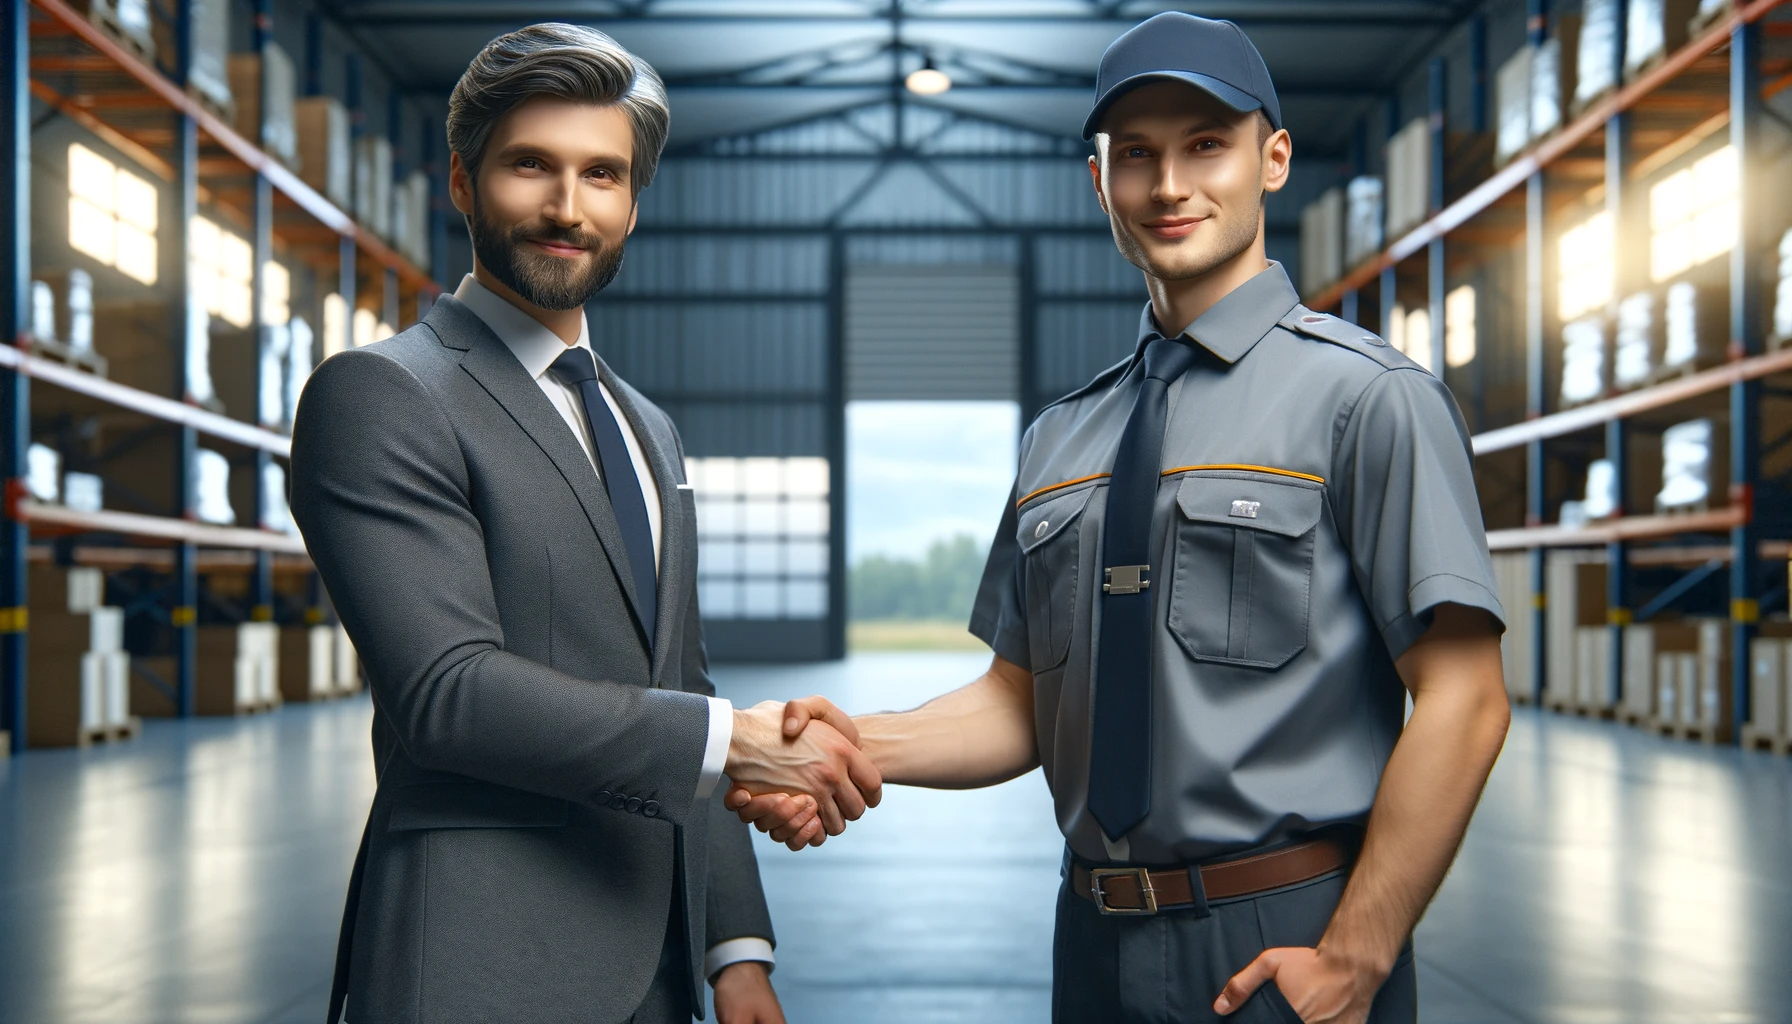 DALL·E 2023-11-22 04.31.41 - A realistic 16_9 image showing a small business entrepreneur shaking hands with a logistics staff member. The entrepreneur should appear as a confiden